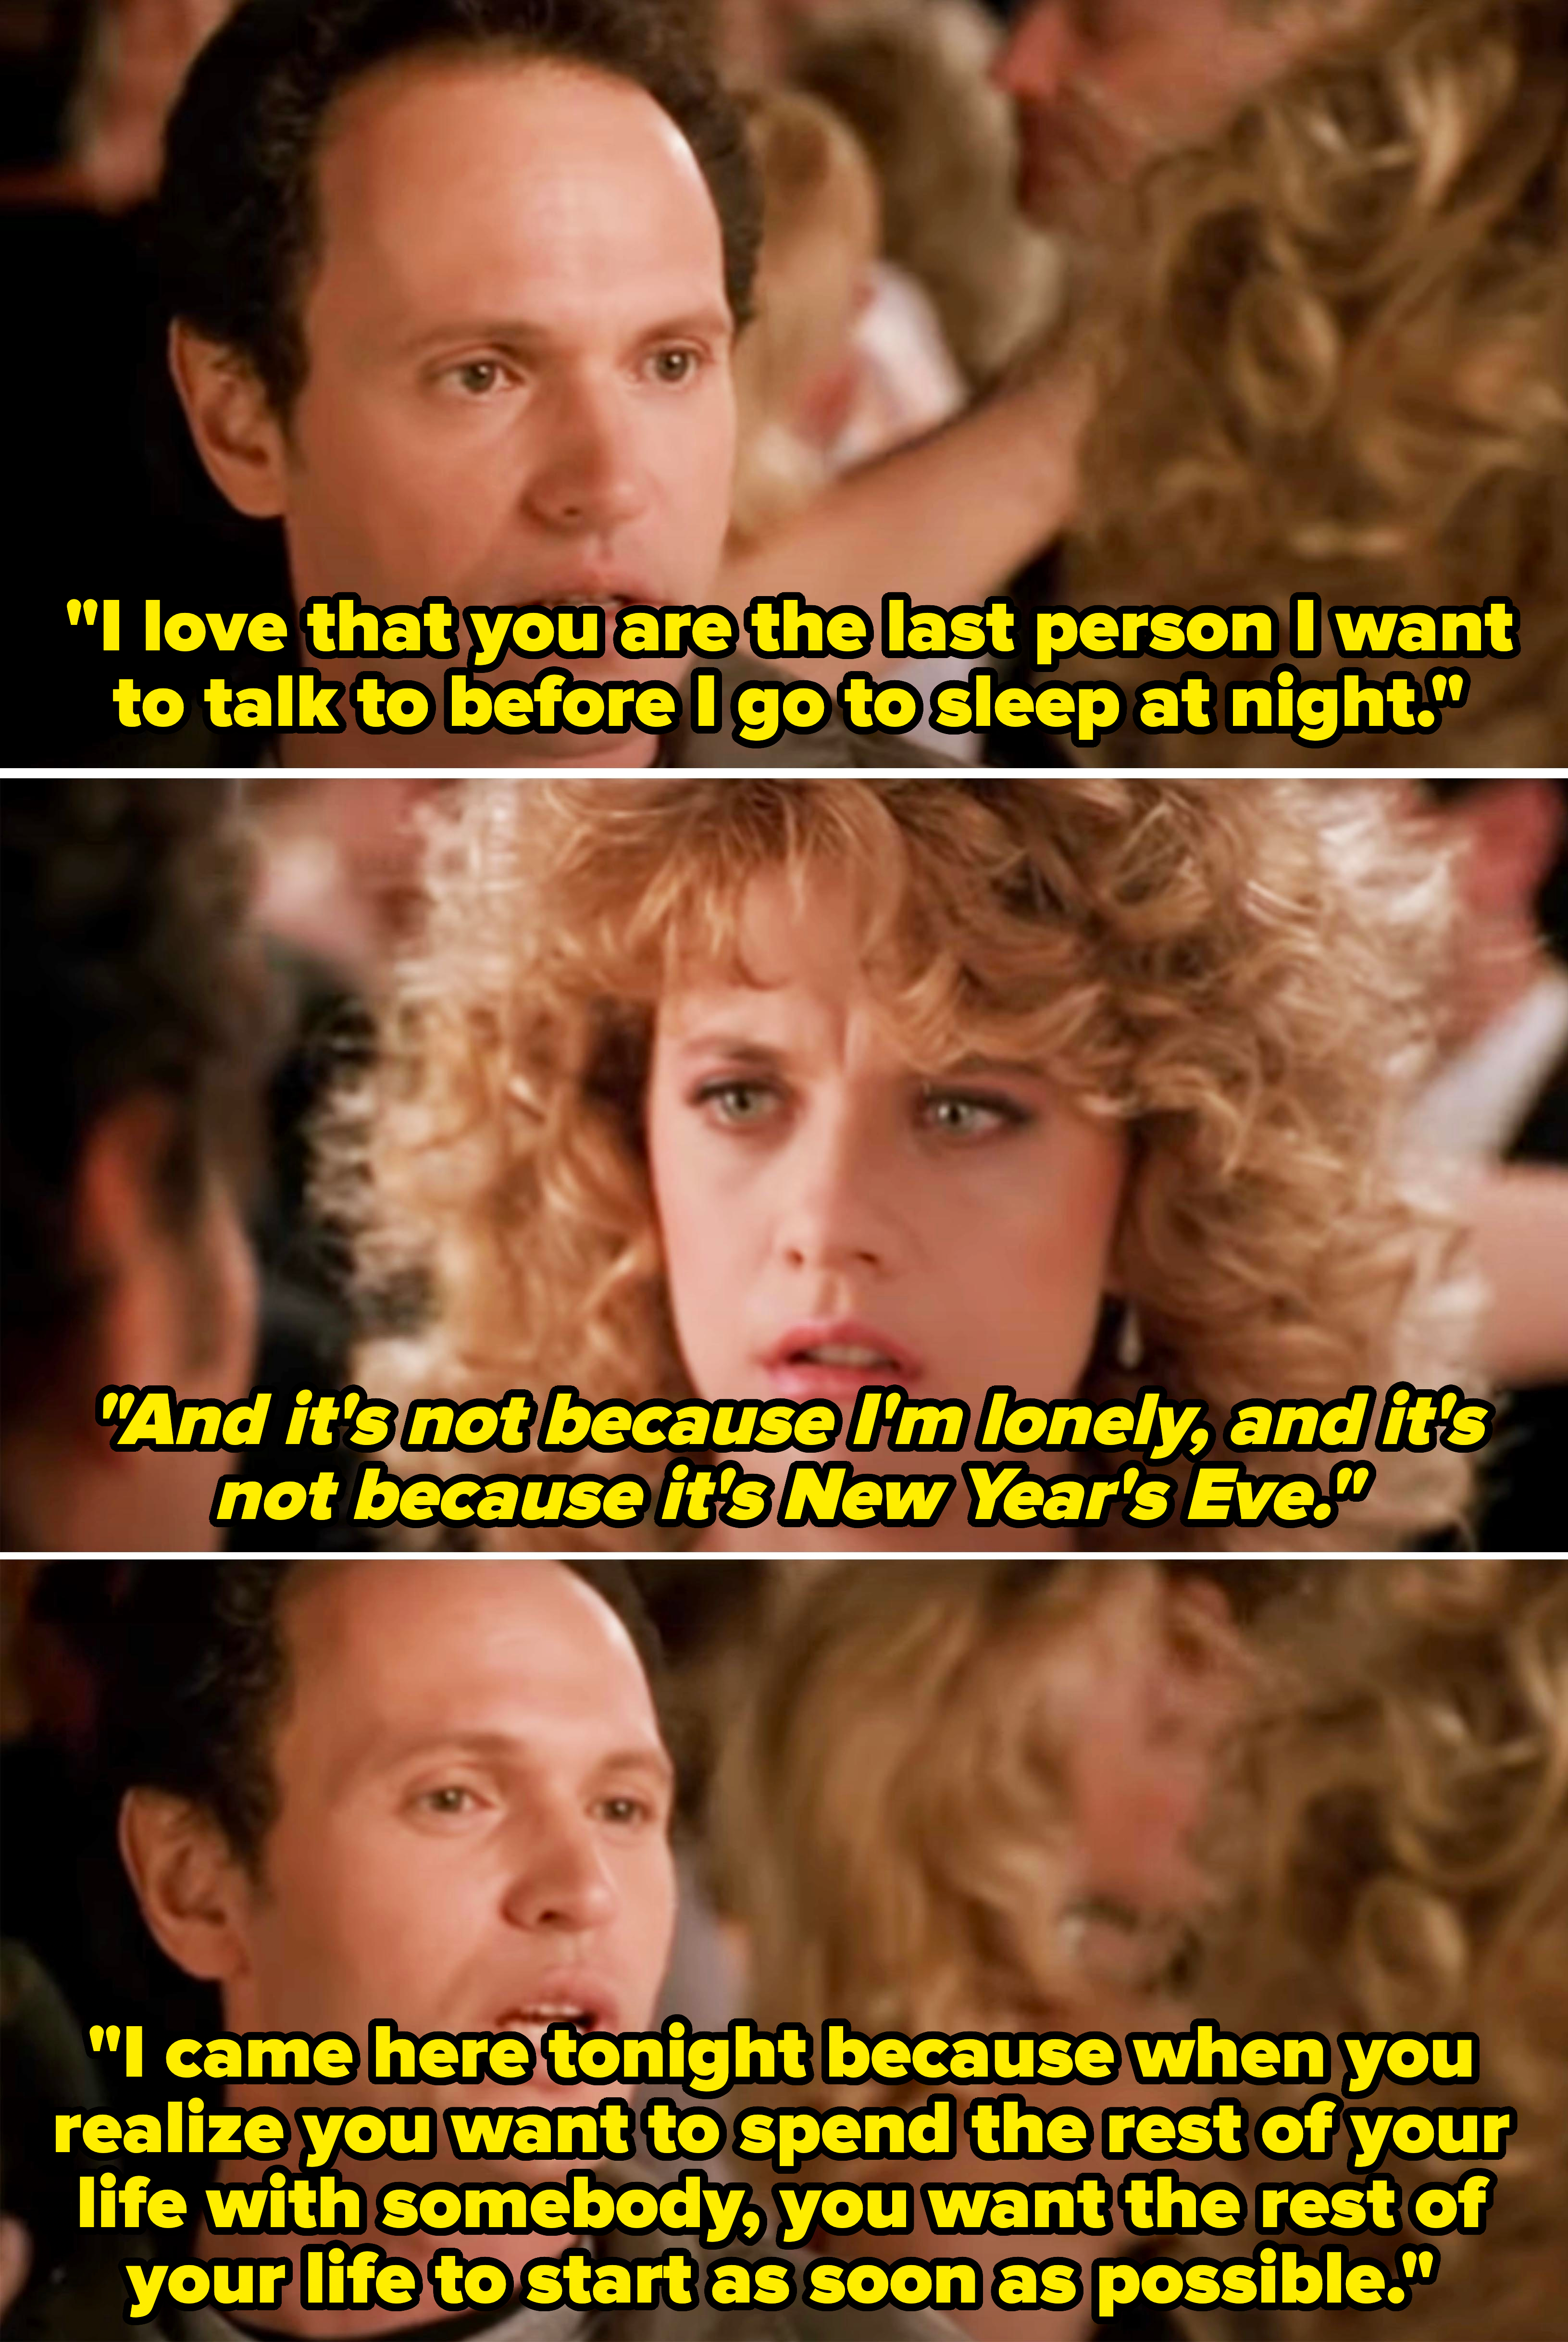 Billy Crystal and Meg Ryan in a scene from the movie &quot;When Harry Met Sally,&quot; with both looking concerned